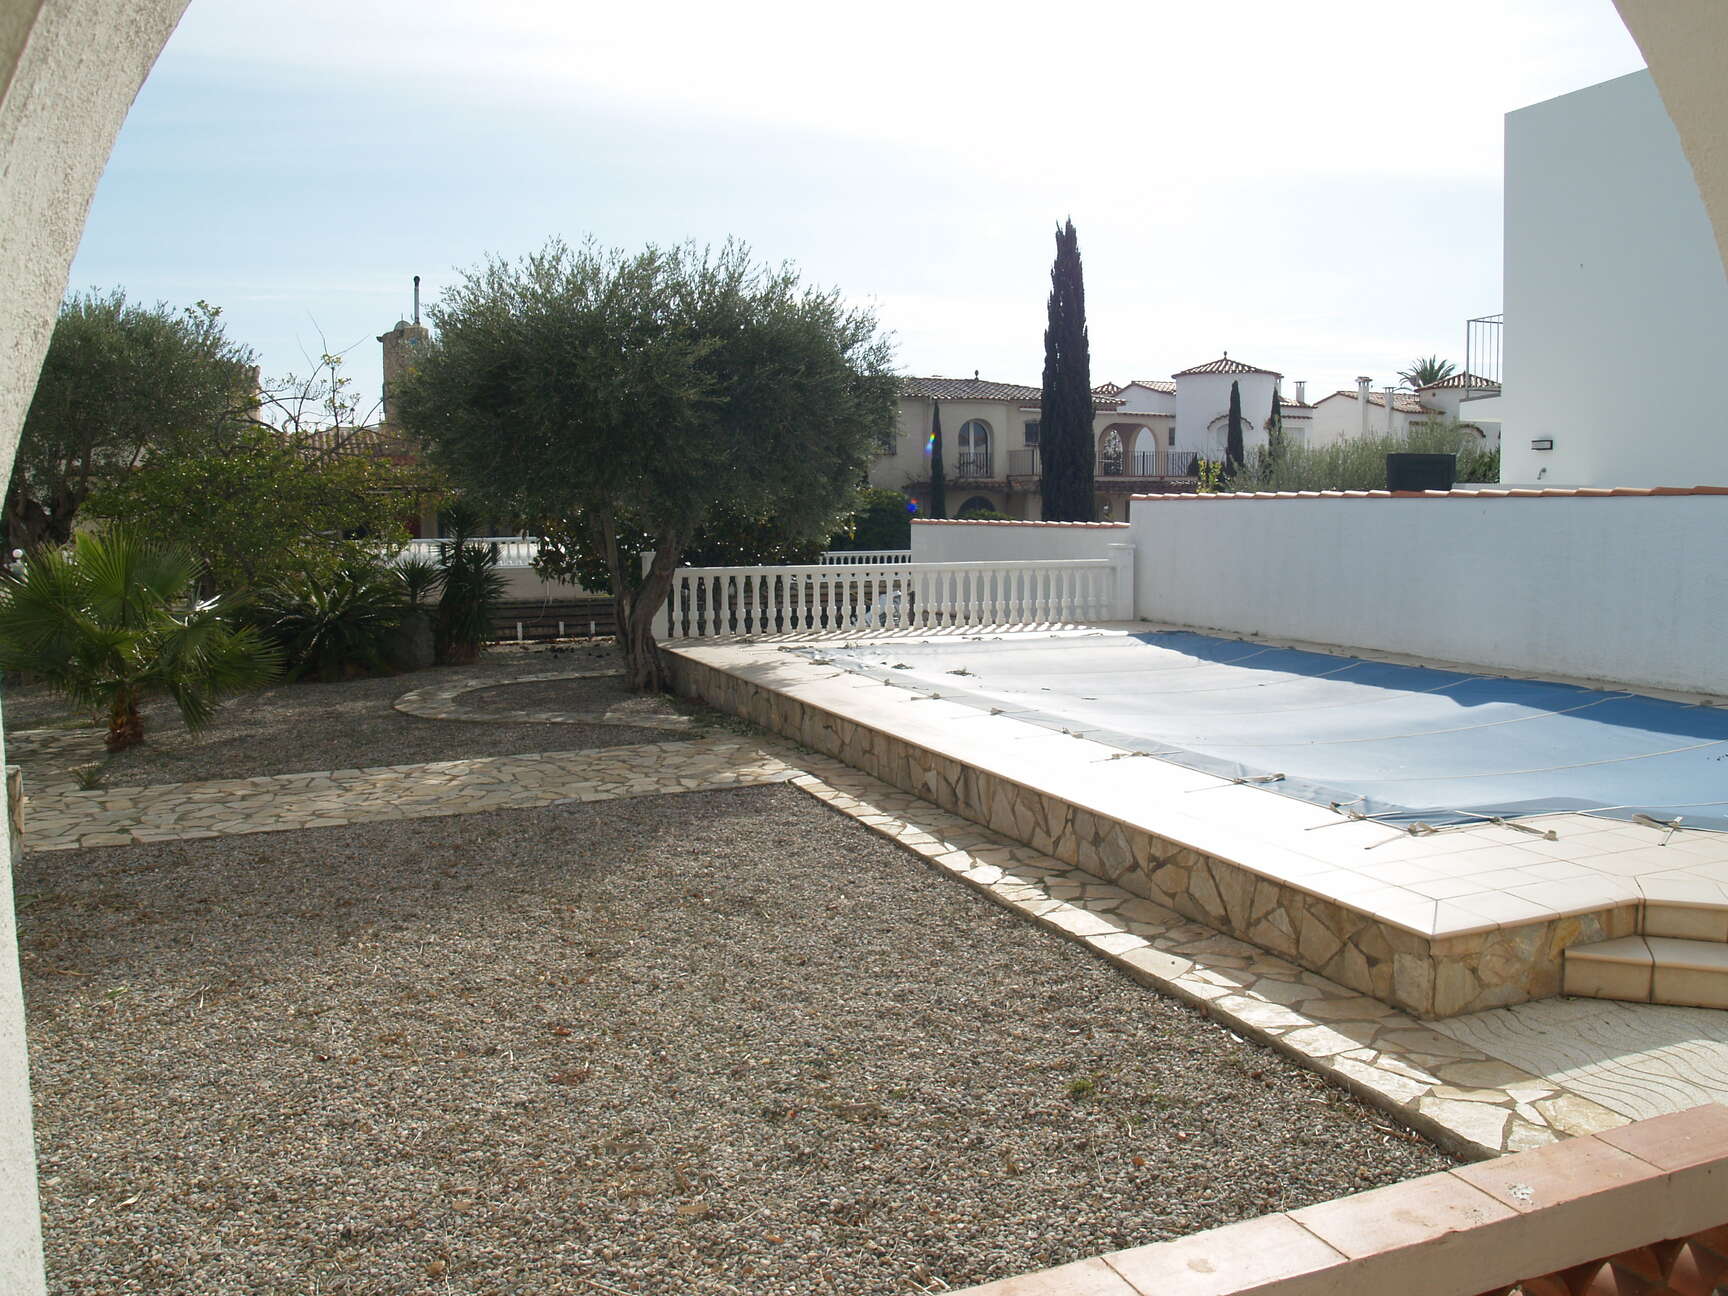 Large plot on the canal of 1000 meters with two houses for sale in Empuriabrava.